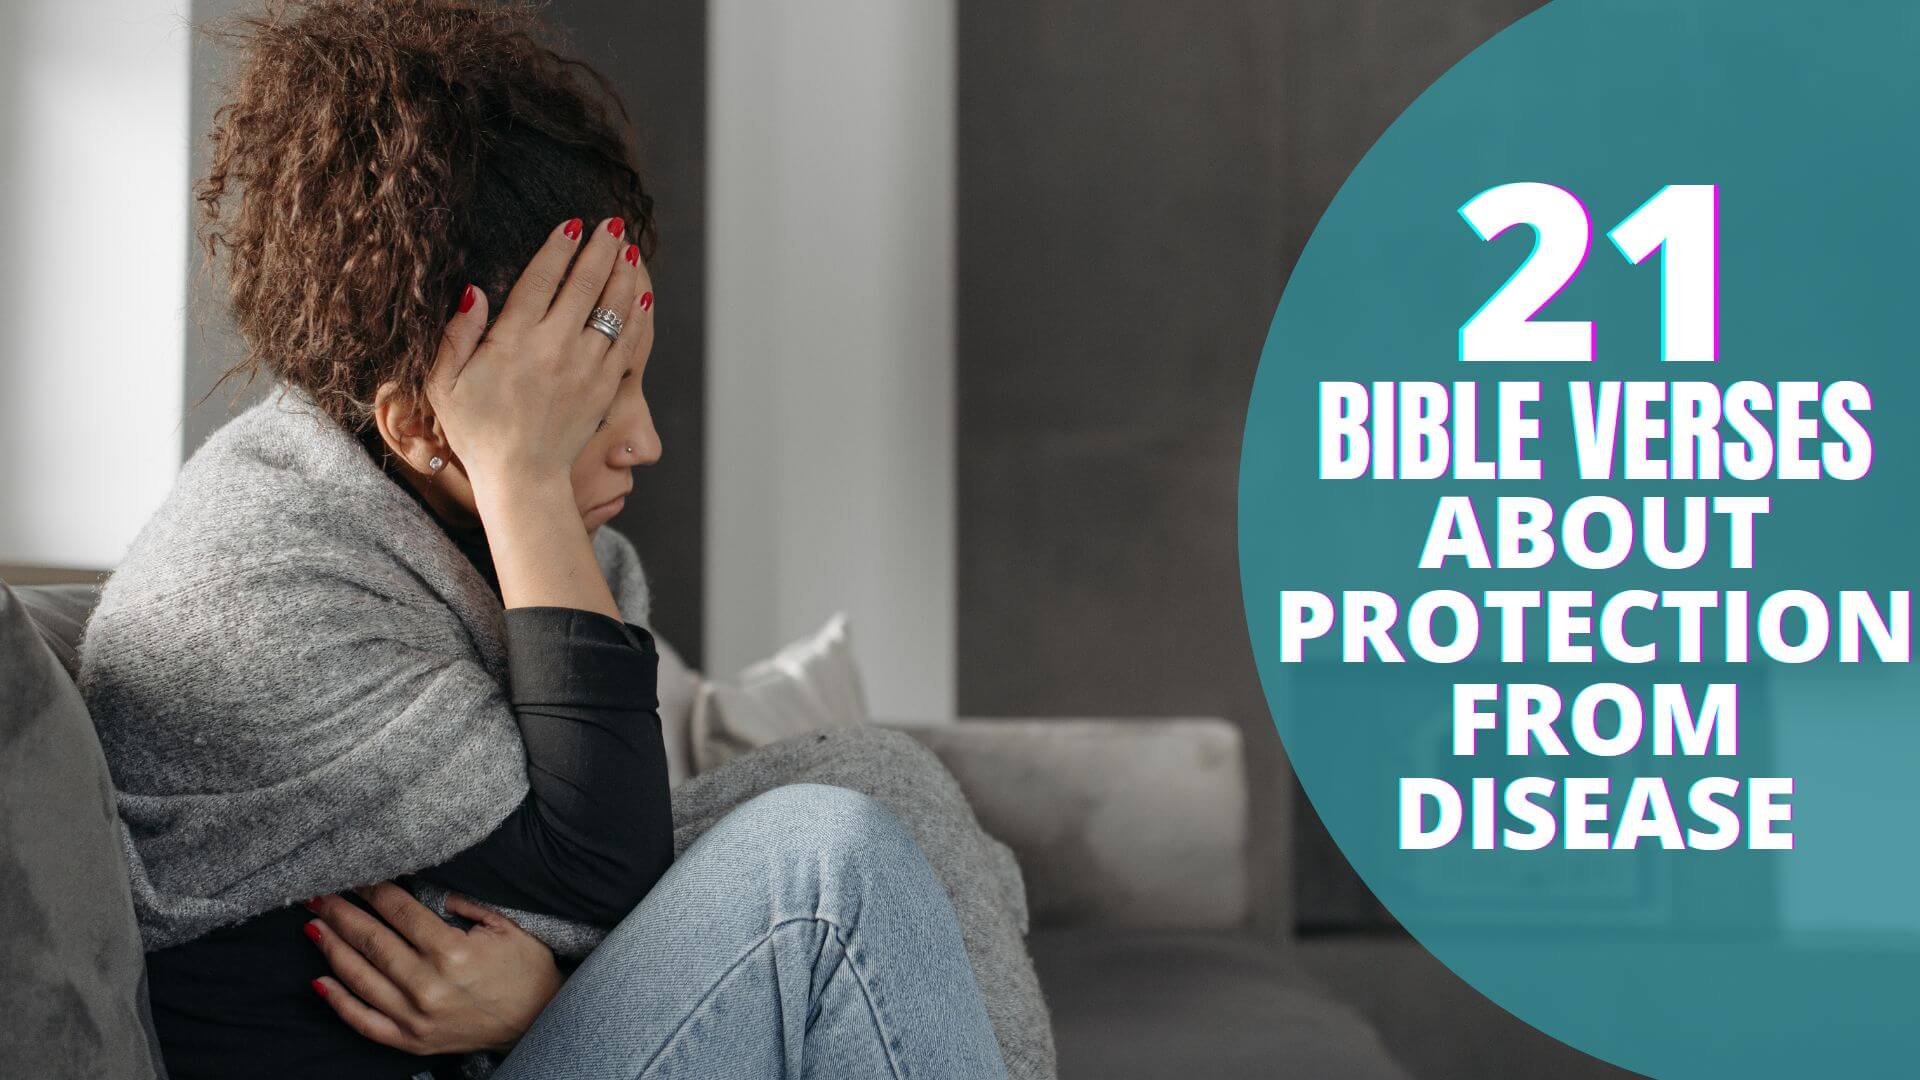 Bible verses about protection from disease